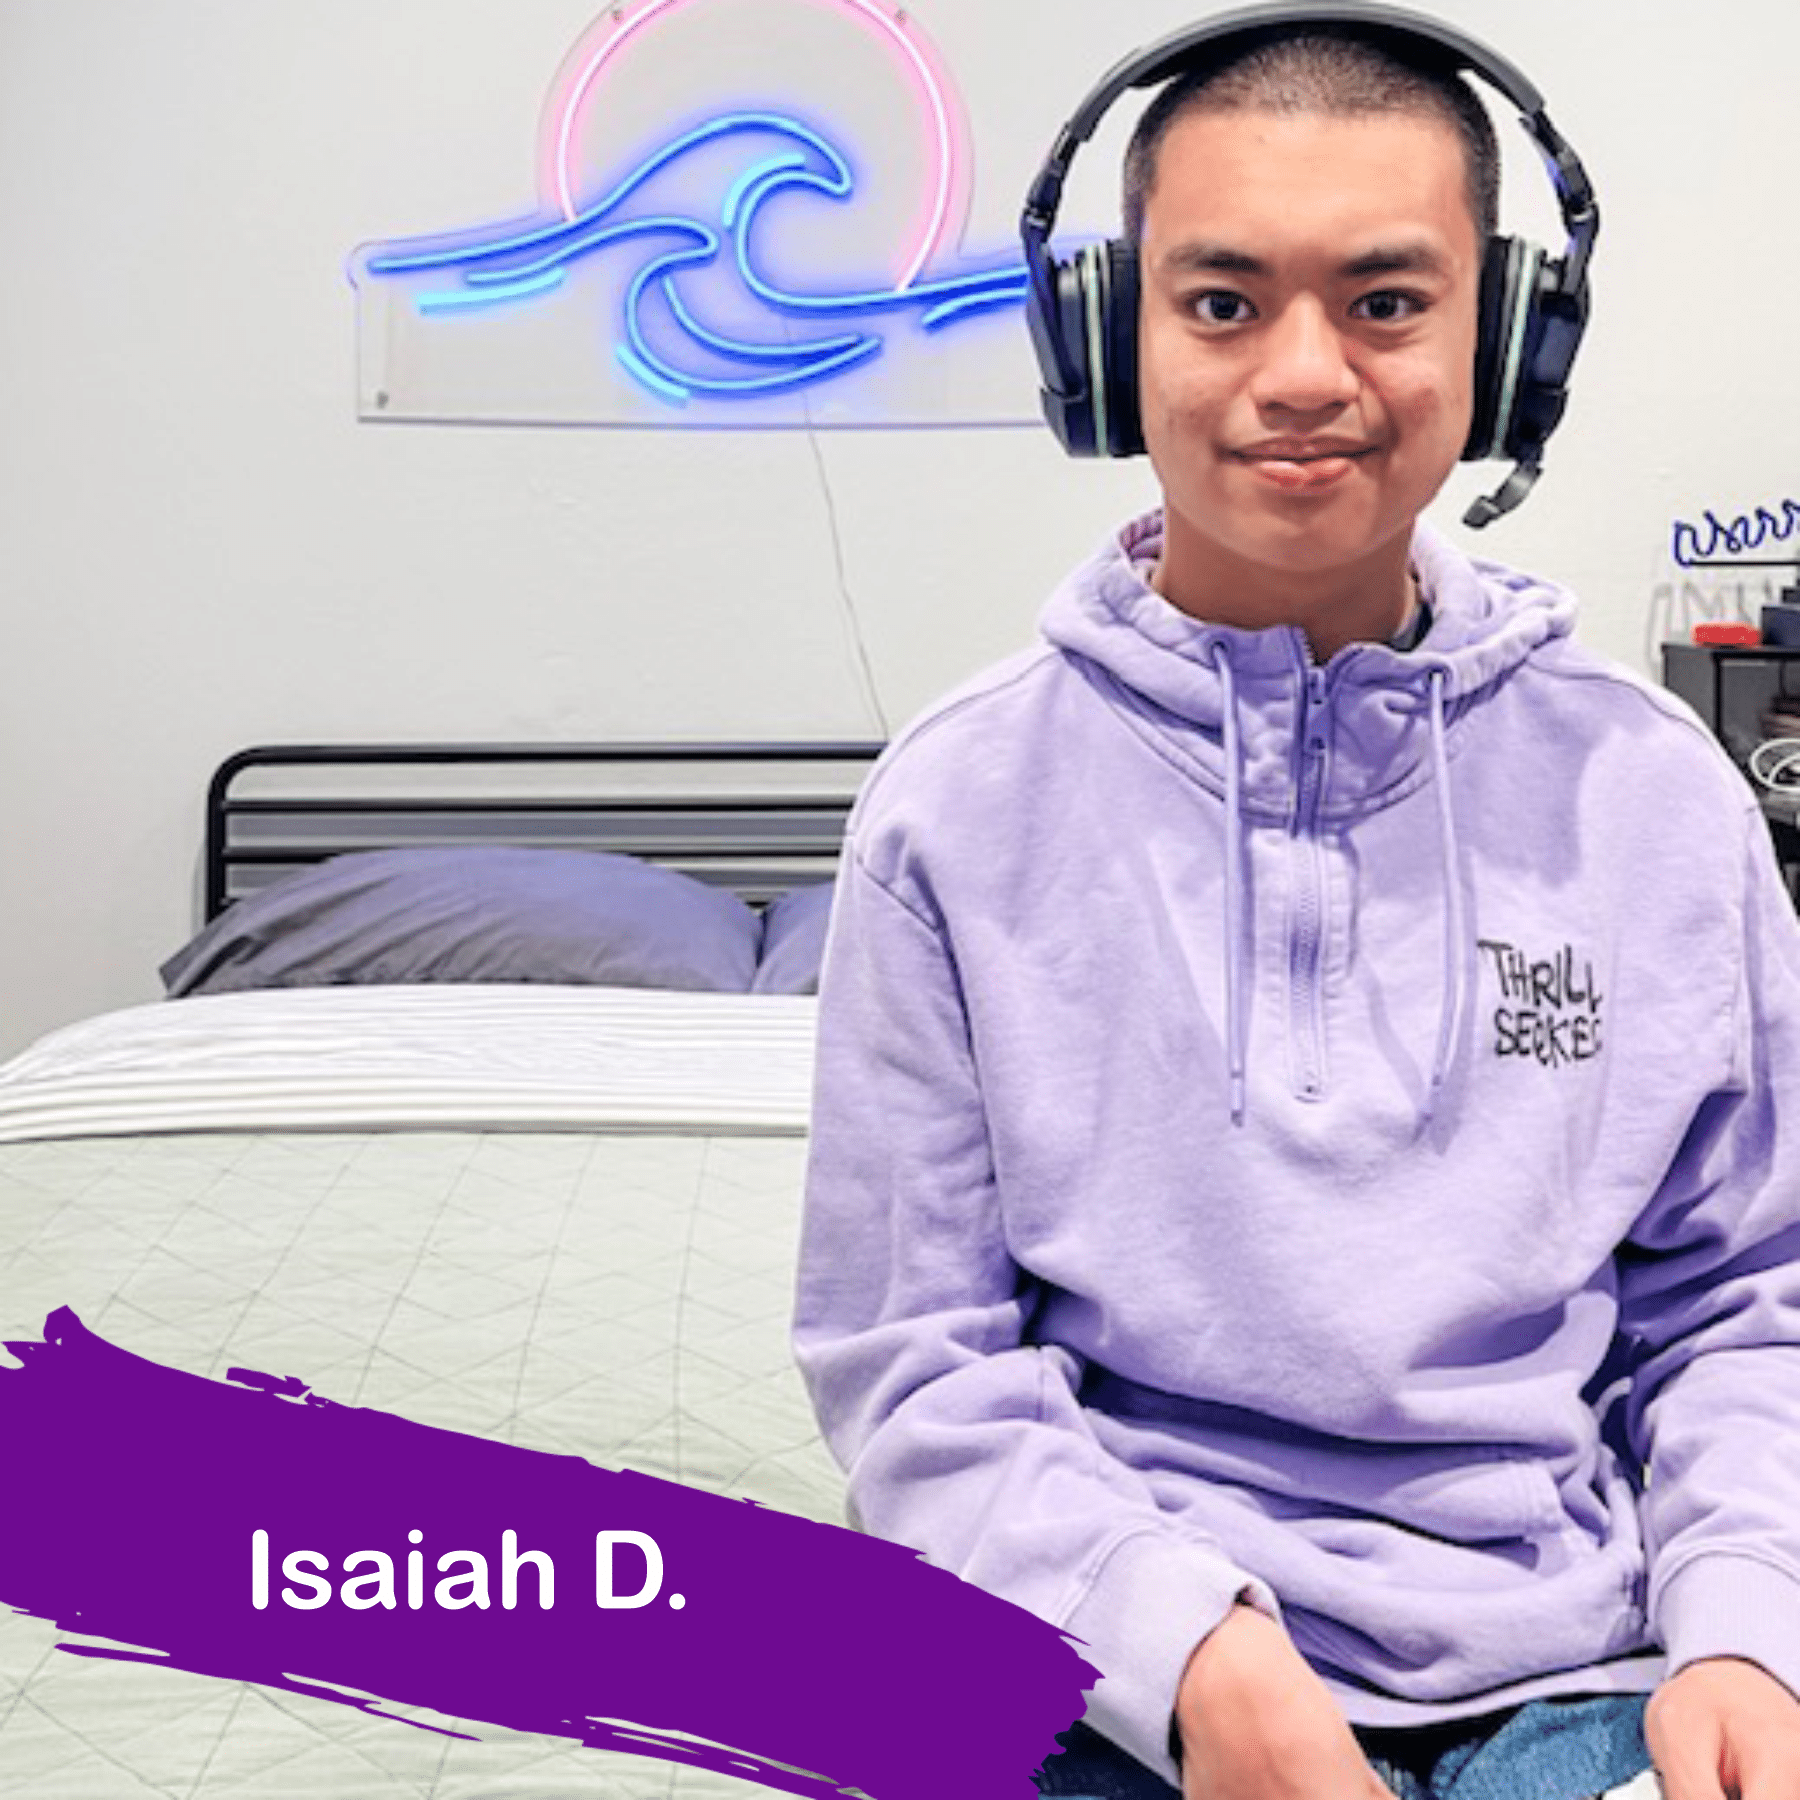 A photo of Isaiah he is wearing a purple hoodie and black headphones after working with AbleGamers to find the right adaptive gaming controller